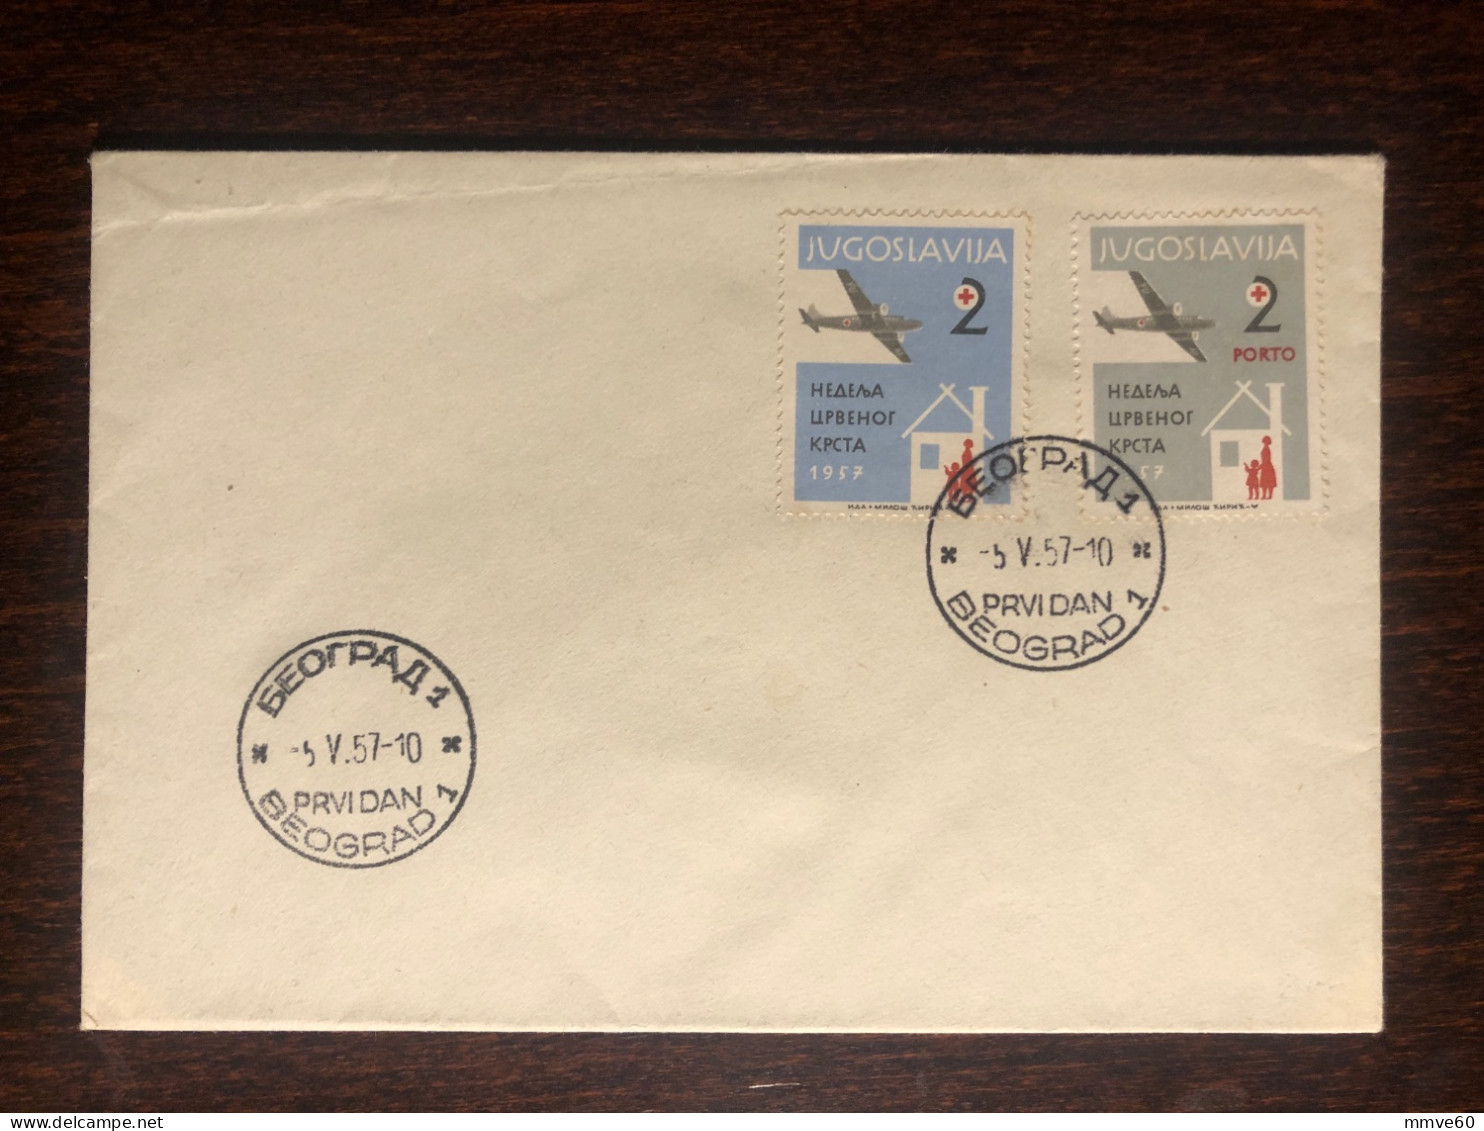 YUGOSLAVIA FDC COVER 1957 YEAR RED CROSS HEALTH MEDICINE STAMPS - FDC